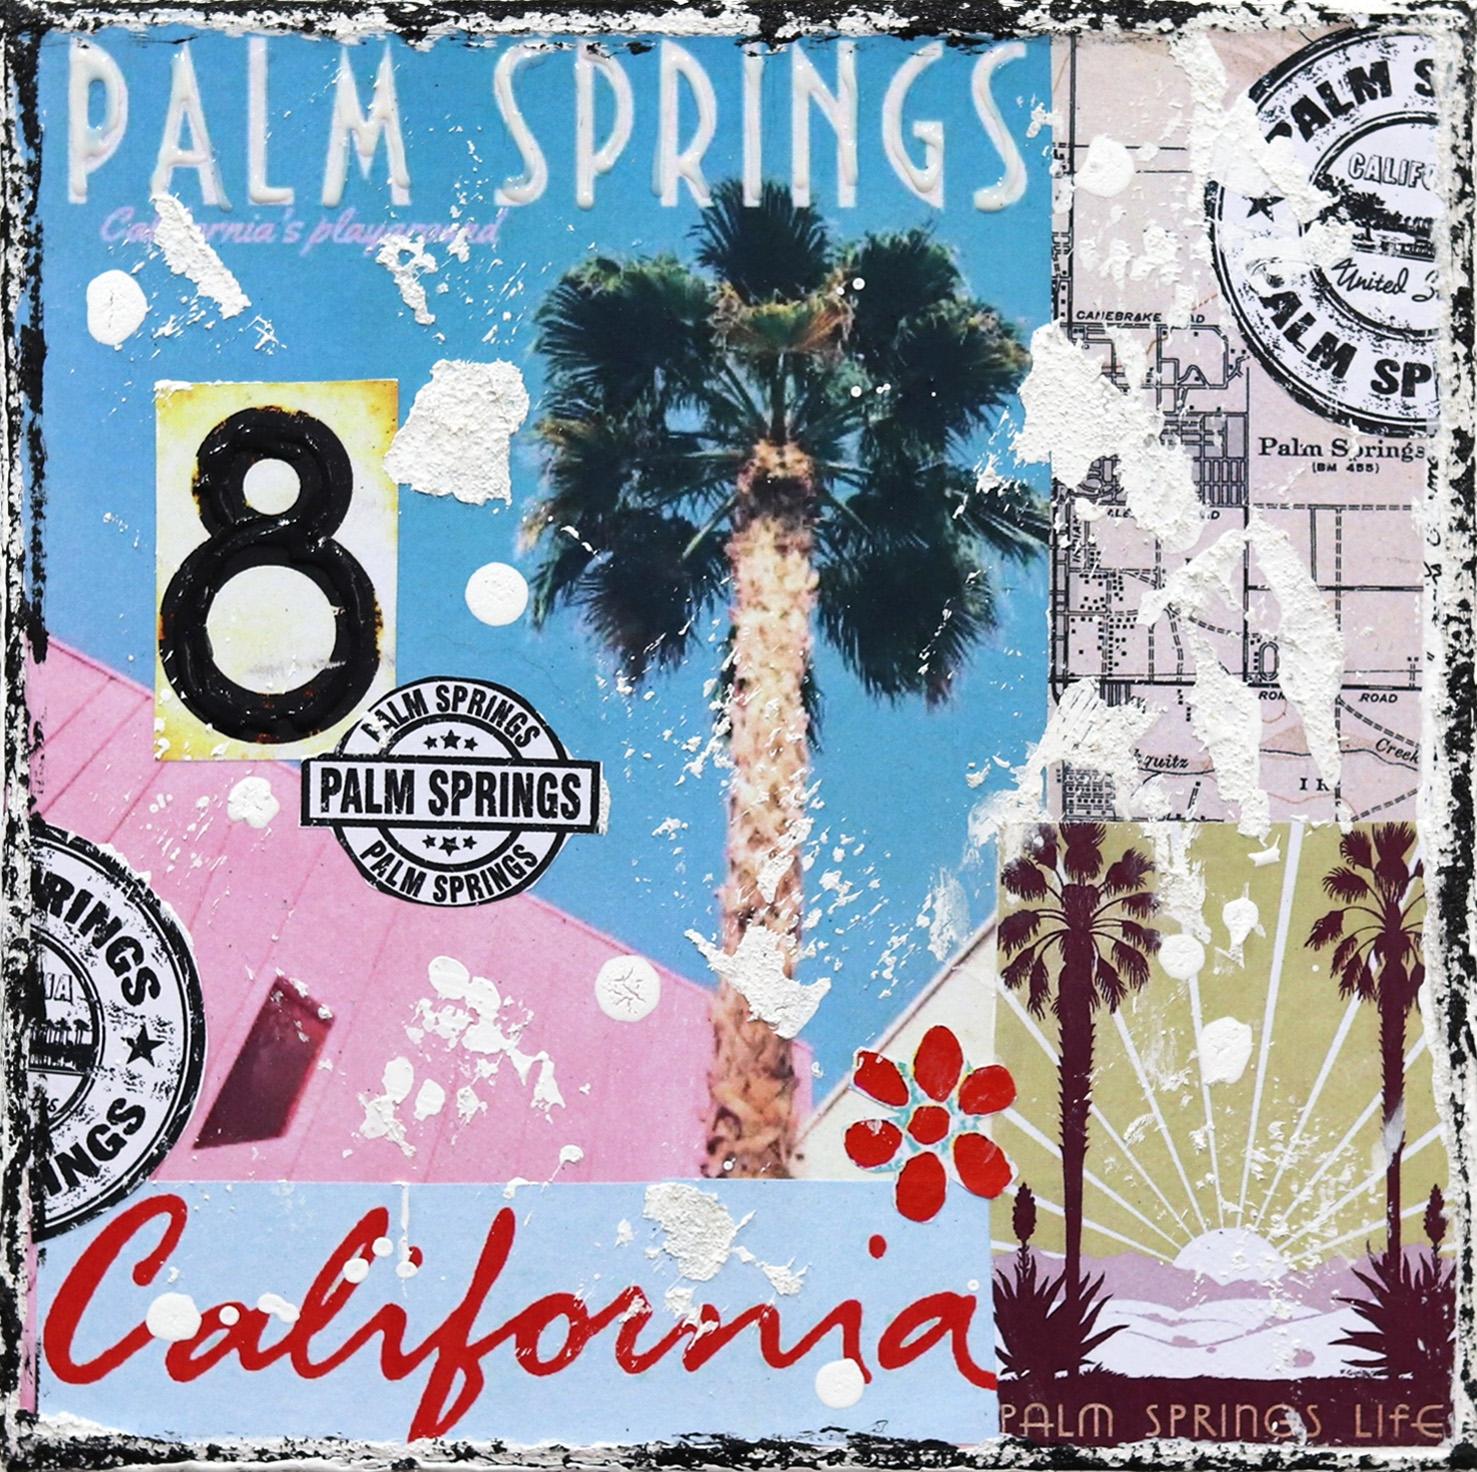 The Beautiful Palm Springs - Mixed Media Art by Marion Duschletta